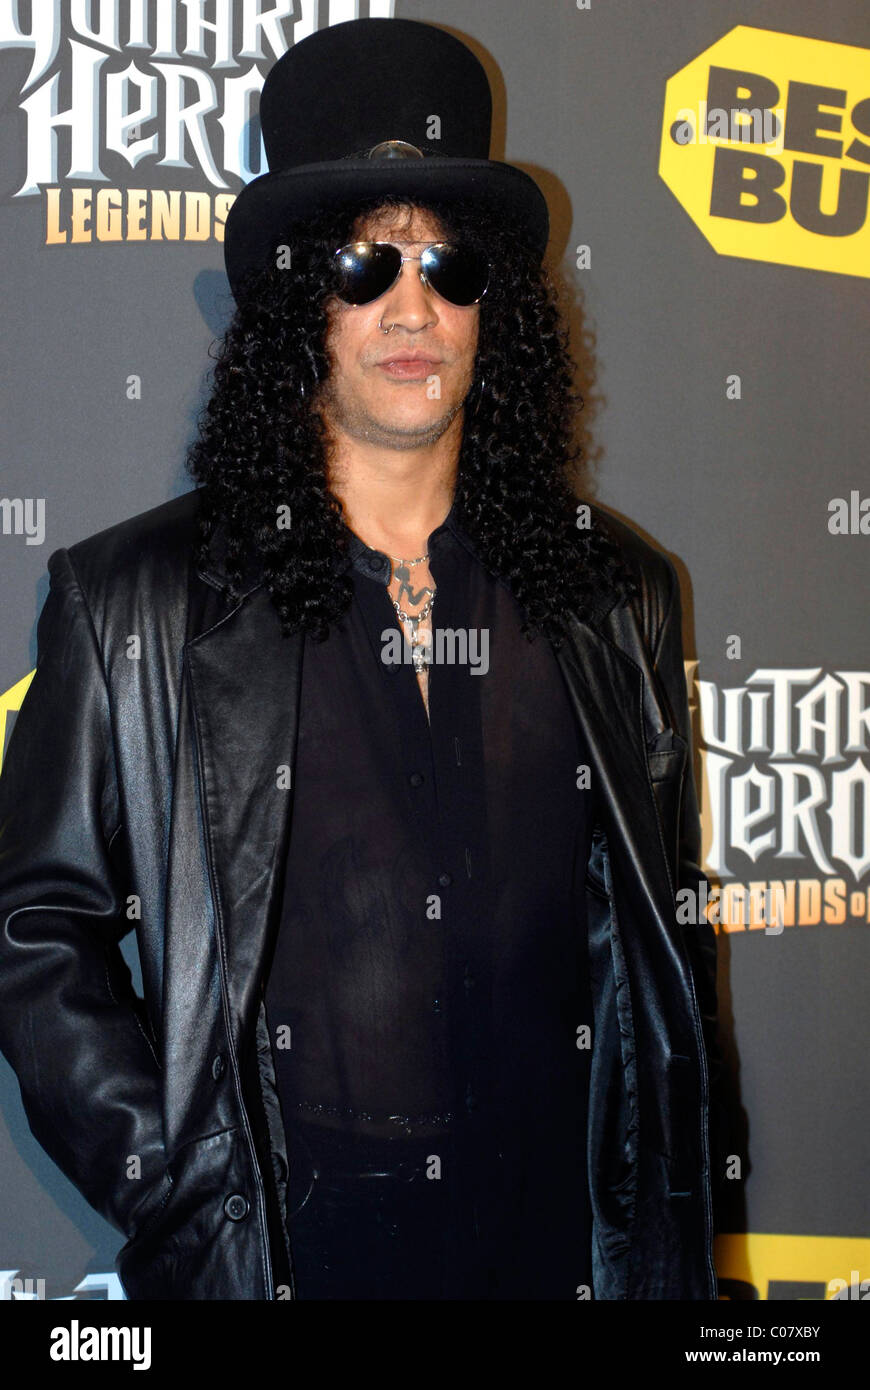 Slash arrives at the Guitar Heroes 3: Legends Of Rock launch event at the Best Buy rooftop Los Angeles, California - 27.10.07 Stock Photo